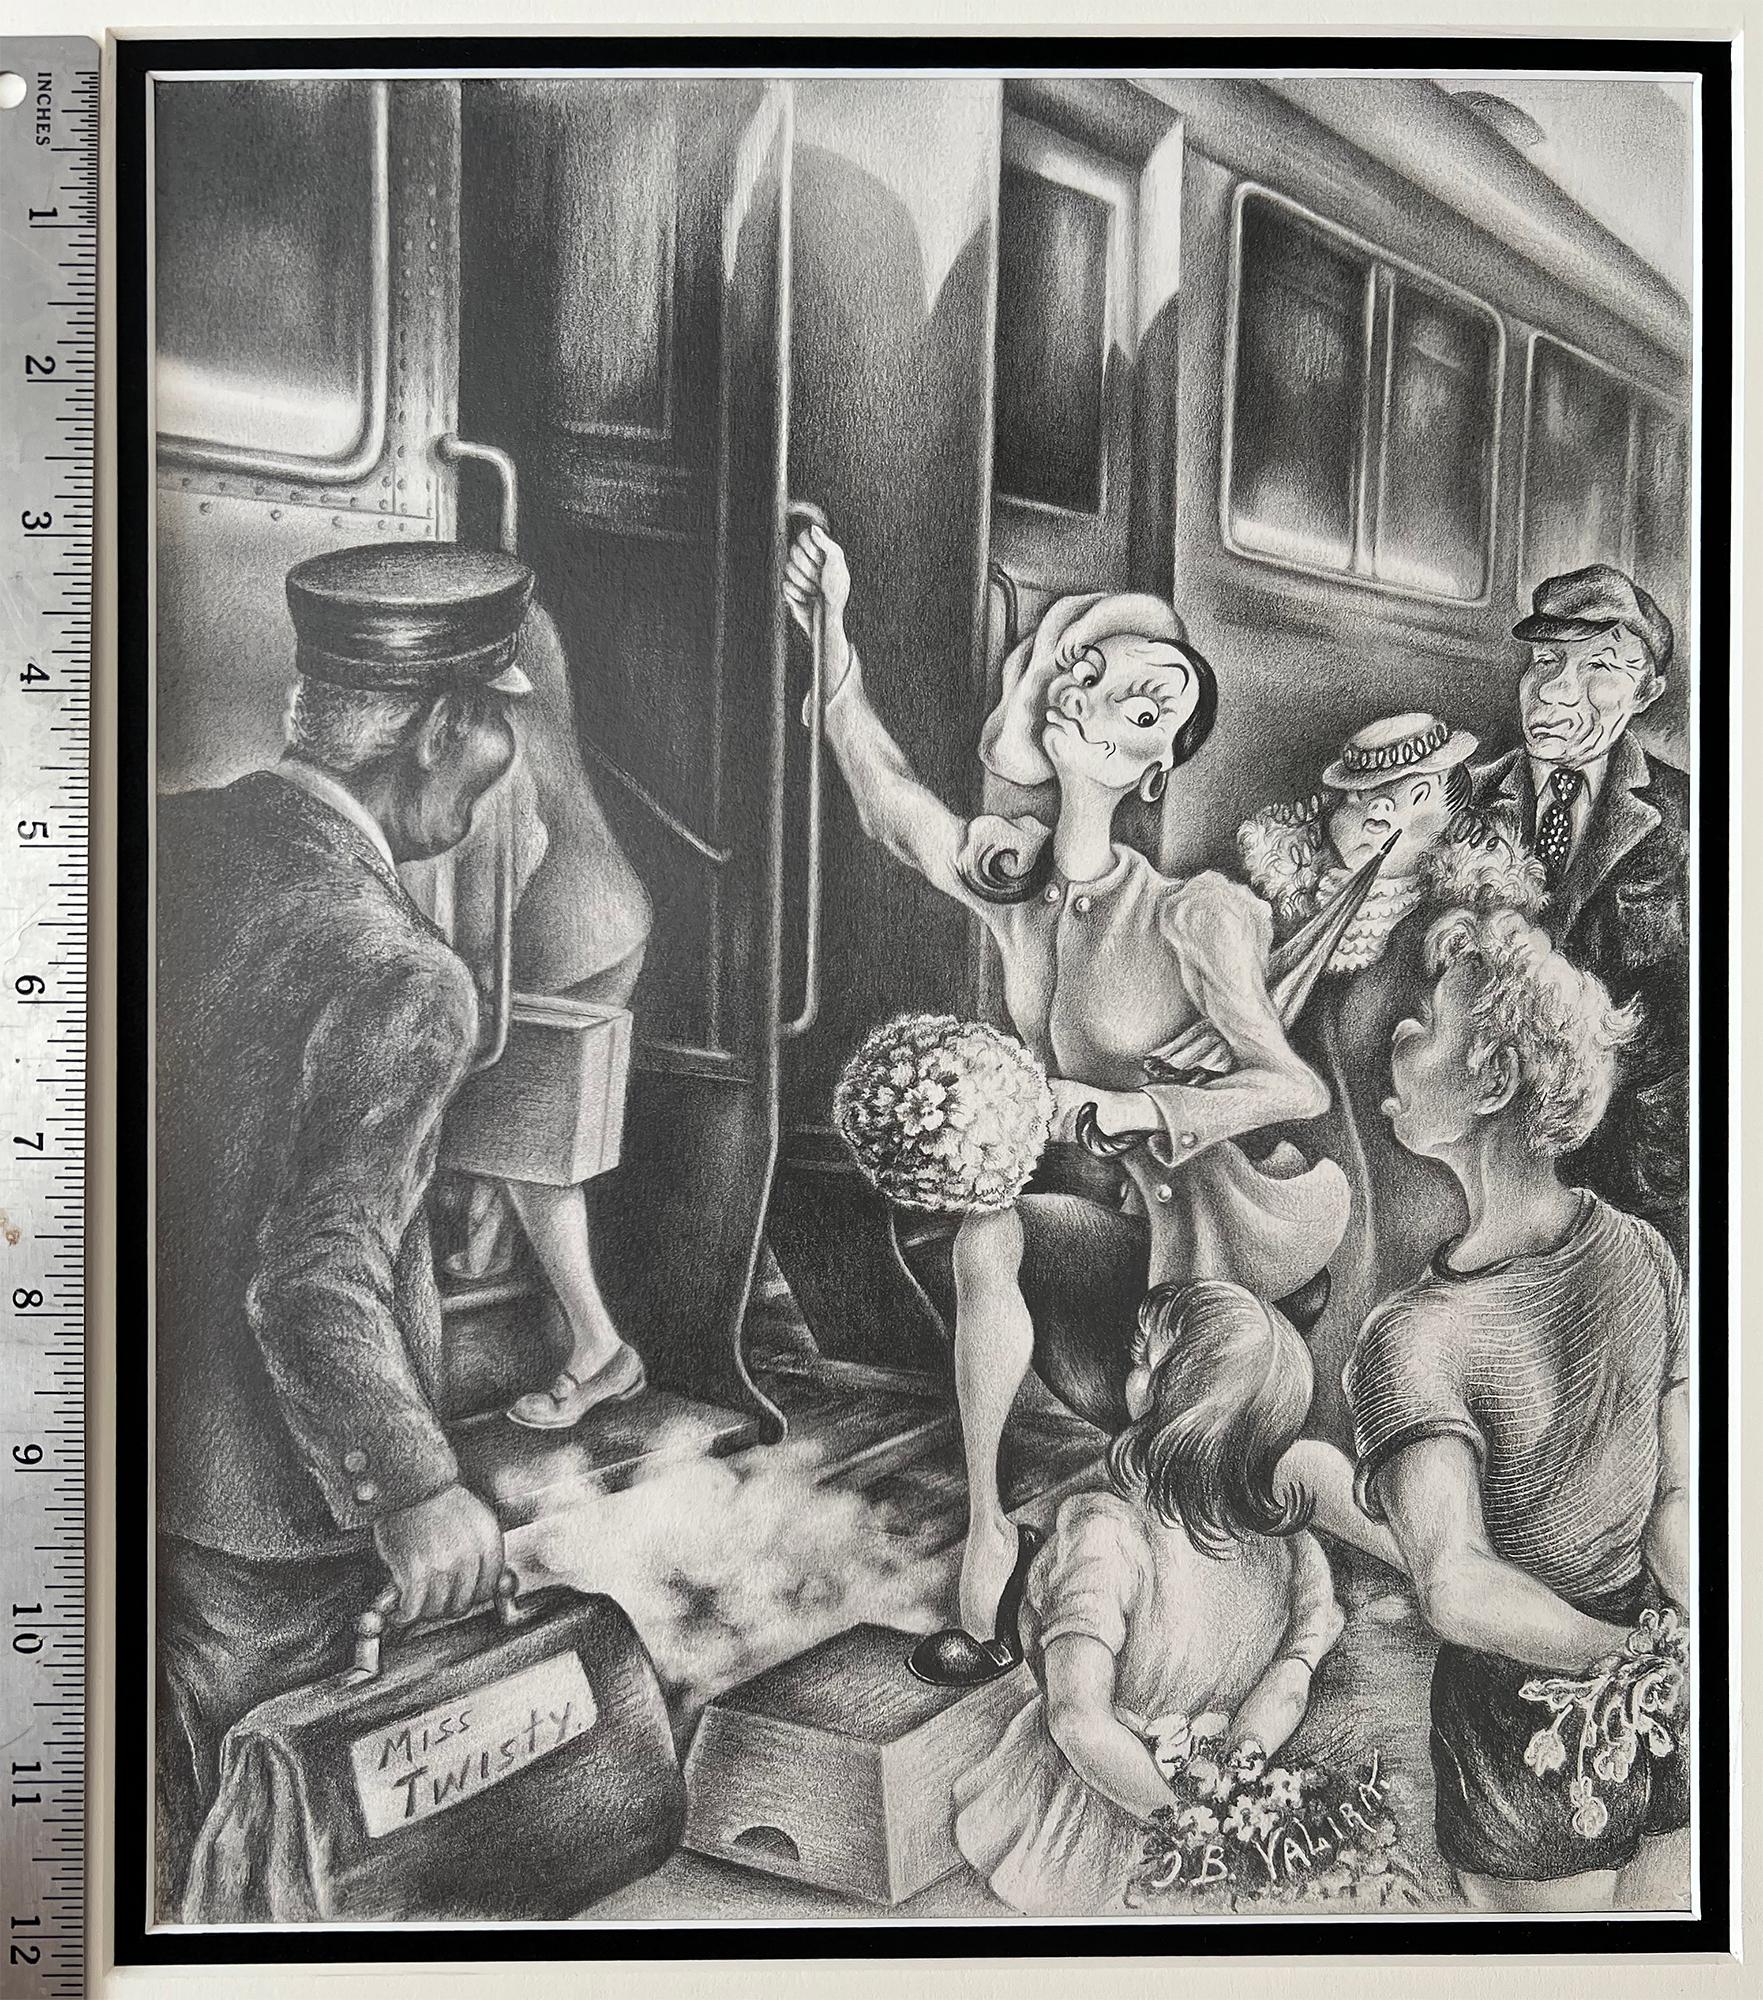 Miss Twisty is a story of a young girl who leaves the big city to spend time in the country.  The book is filled with insight and humor.   This work is a deftly rendered black-and-white graphite illustration that showcases the artist's storytelling